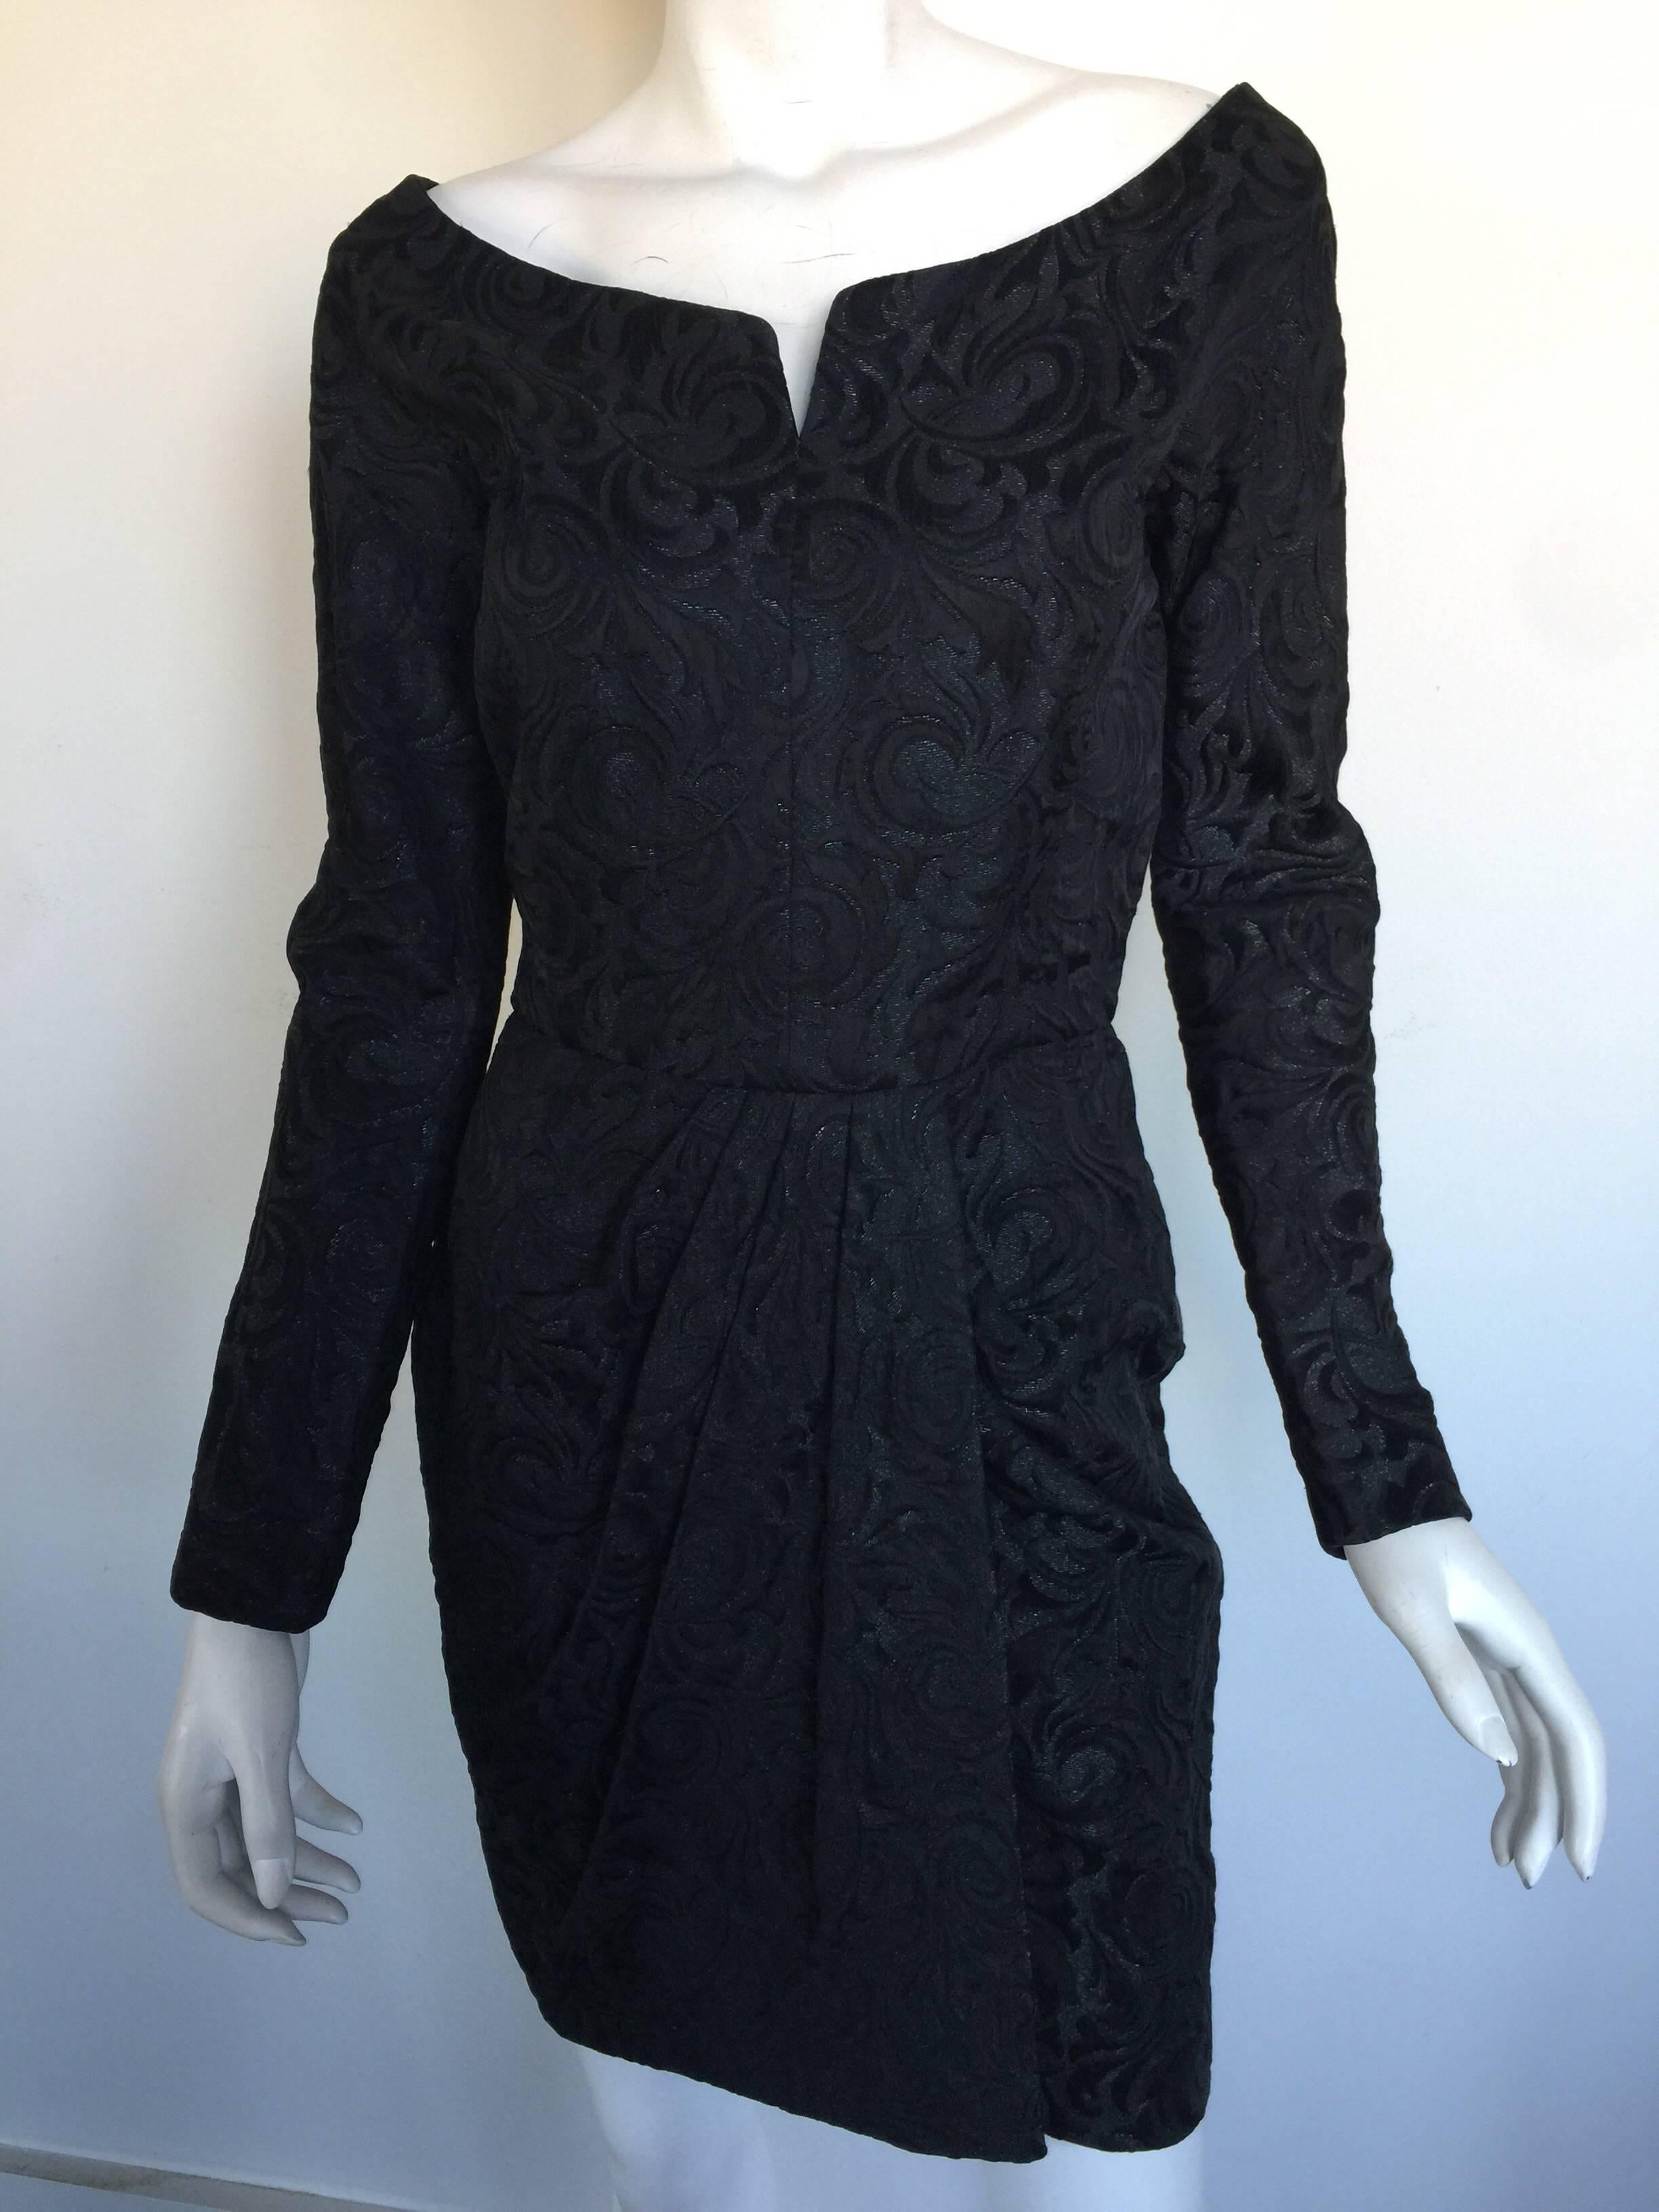 This 1980s Anne Klein dress is a black brocade mini dress.  Perfect for the holidays.  Boat neck and synched waistline with a draped skirt. 